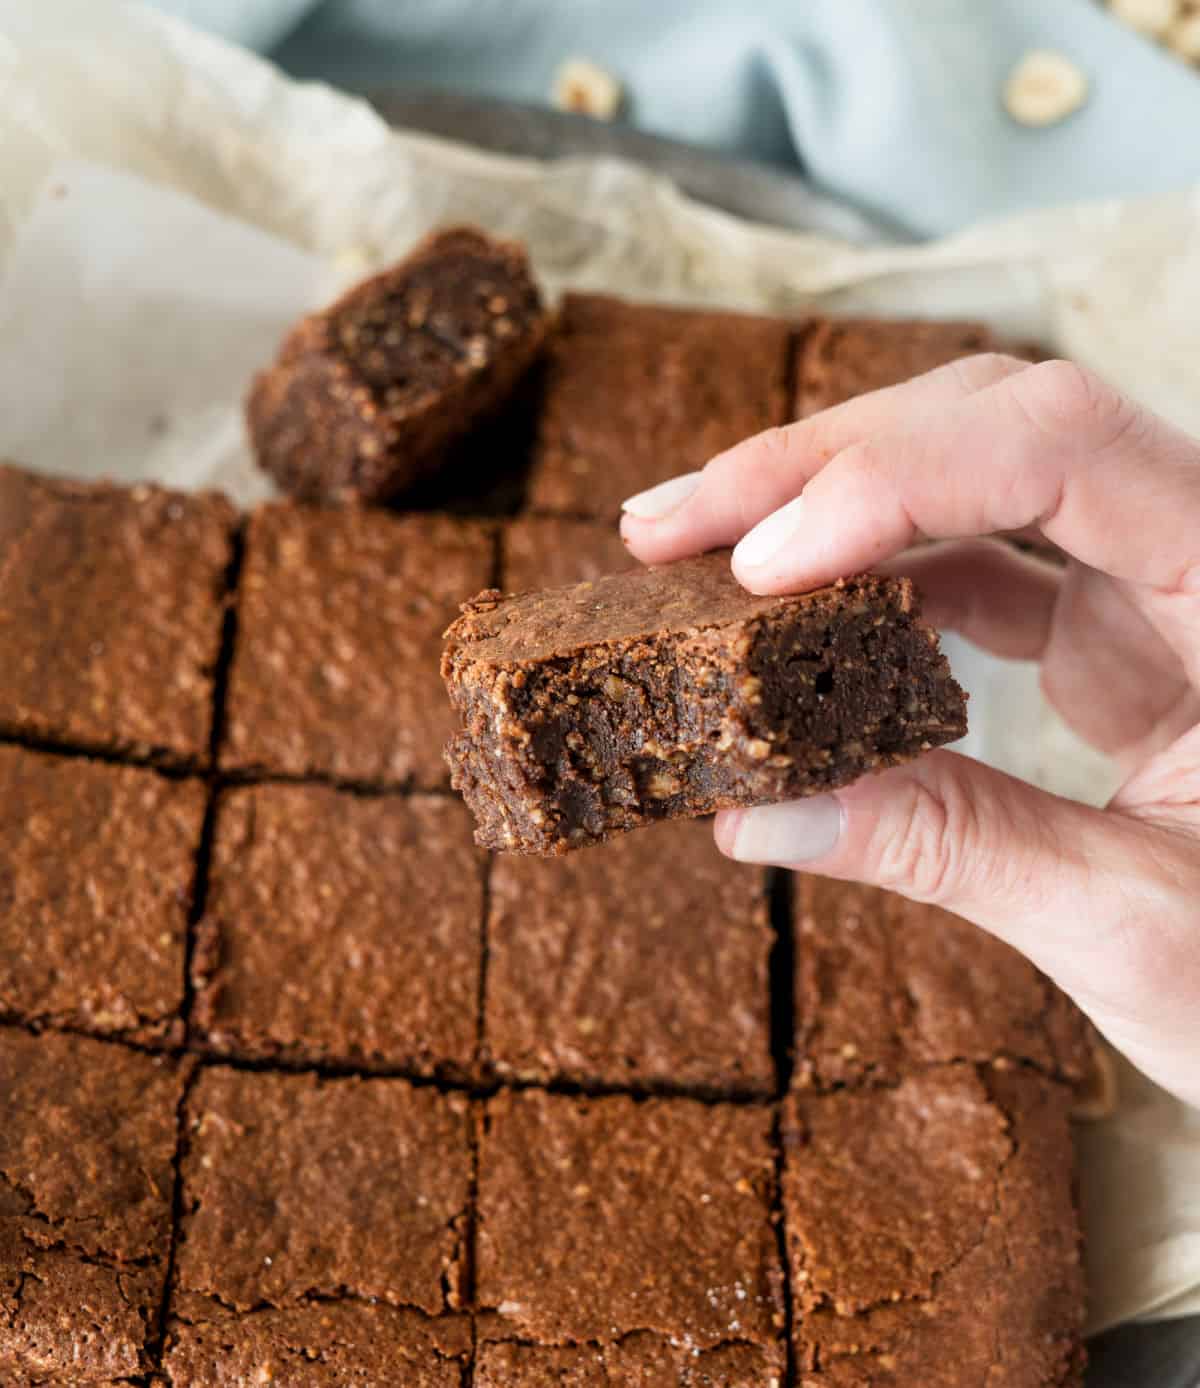 Hand holding bitten brownie with whole block of brownies below them.